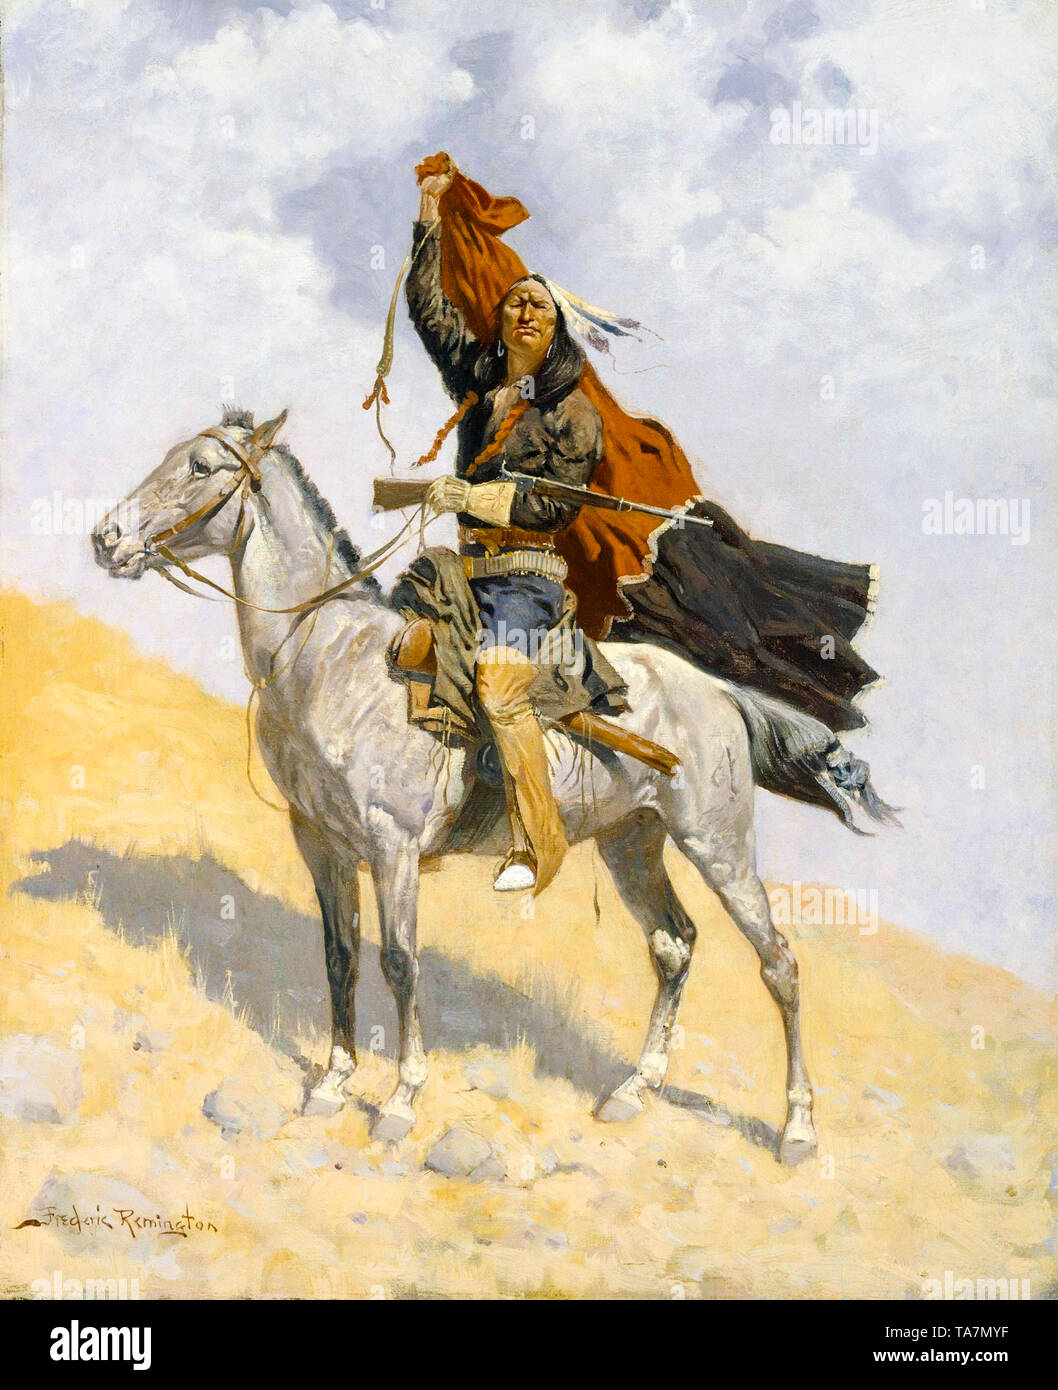 Frederic Remington, The Blanket Signal, painting, c. 1894 Stock Photo